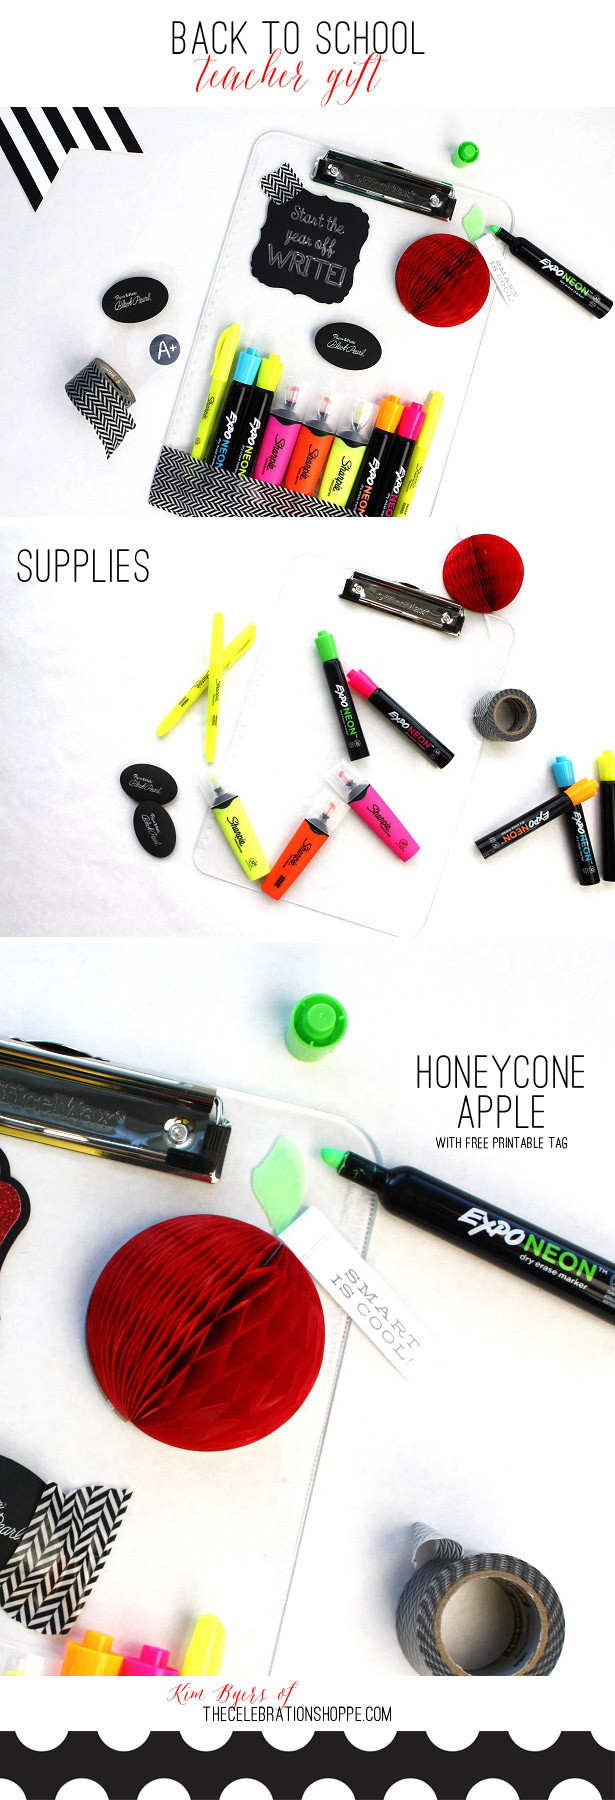 Back to school teacher gift with honeycone apple